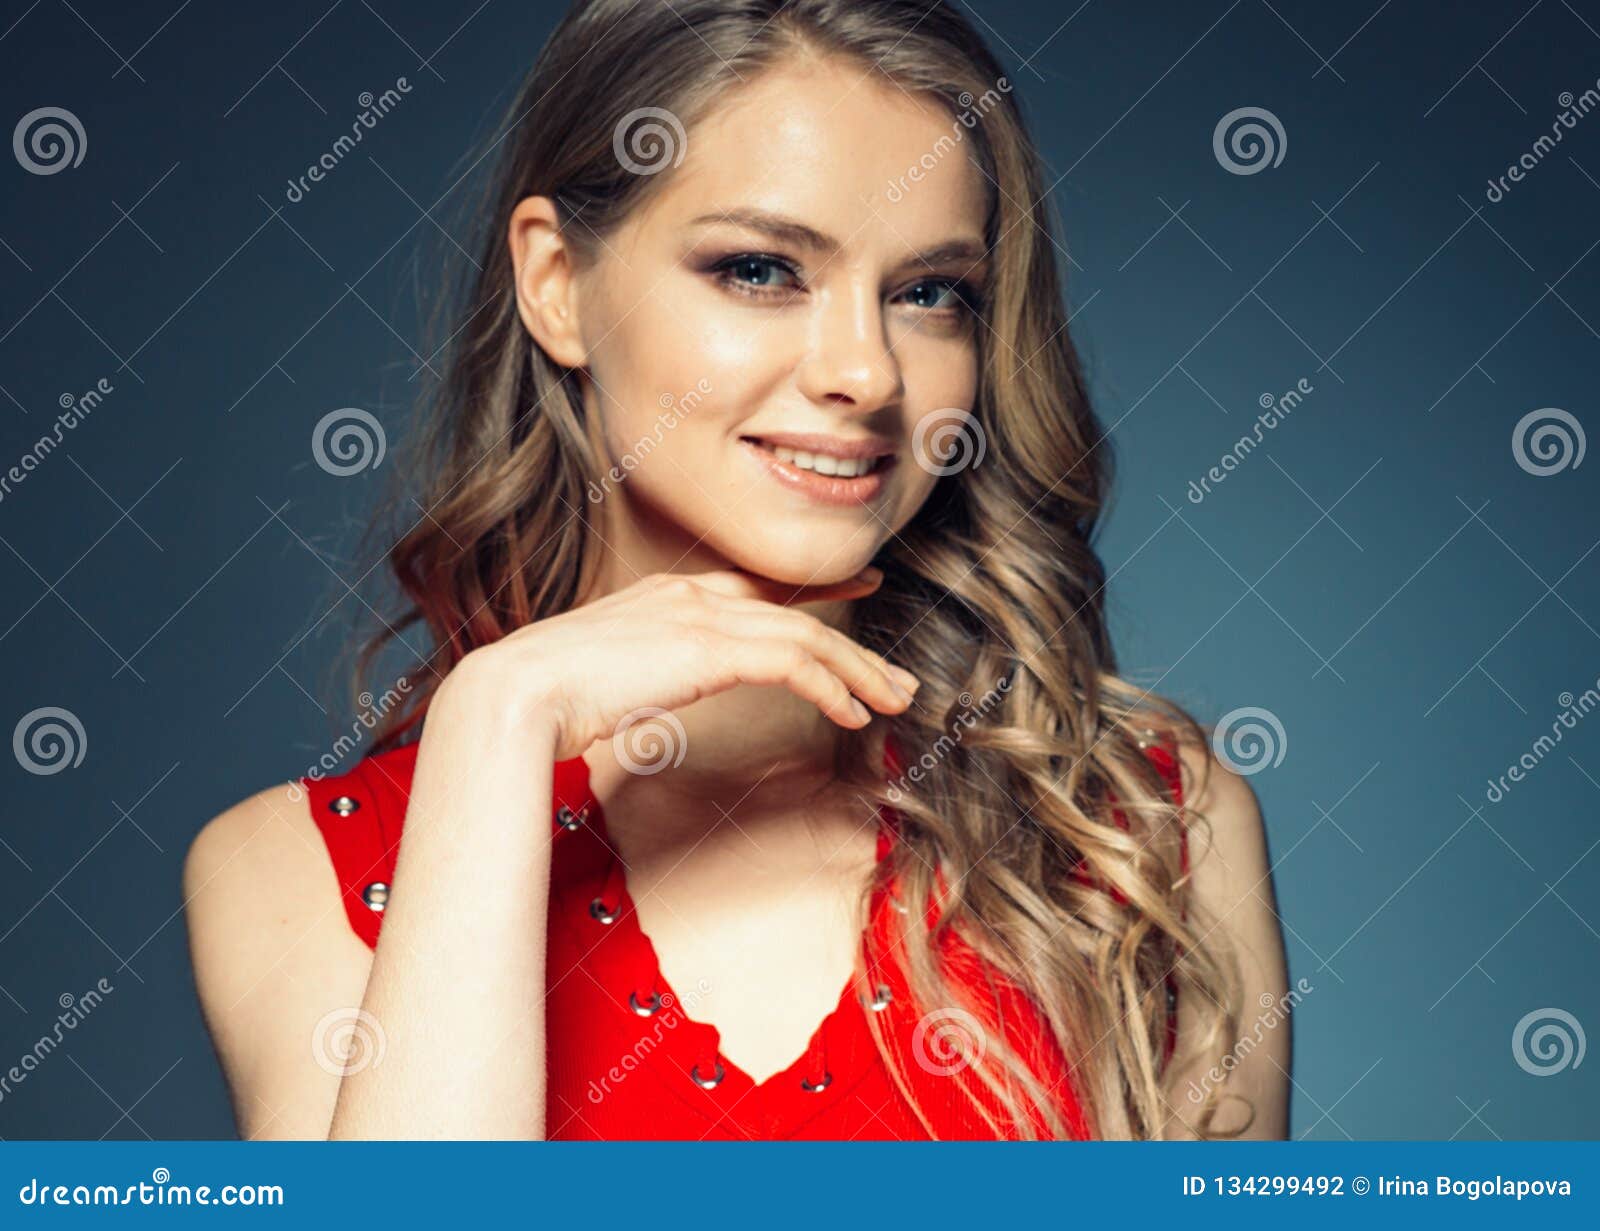 Woman in Red Dress with Long Blonde Hair Stock Photo - Image of makeup ...